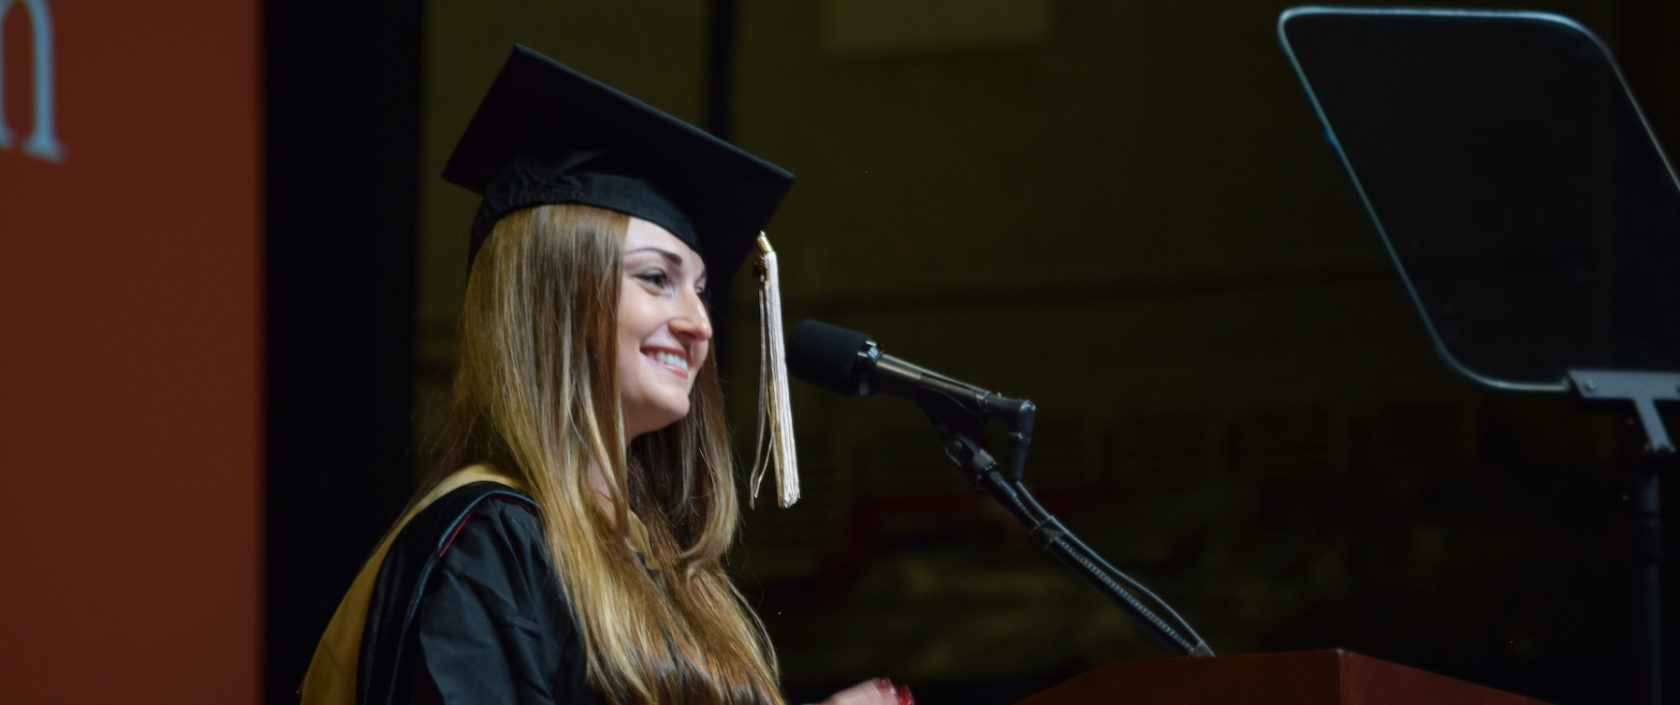 Photo of a woman wearing a graduation cap and gown, she is looking out into a crowd and facing a microphone